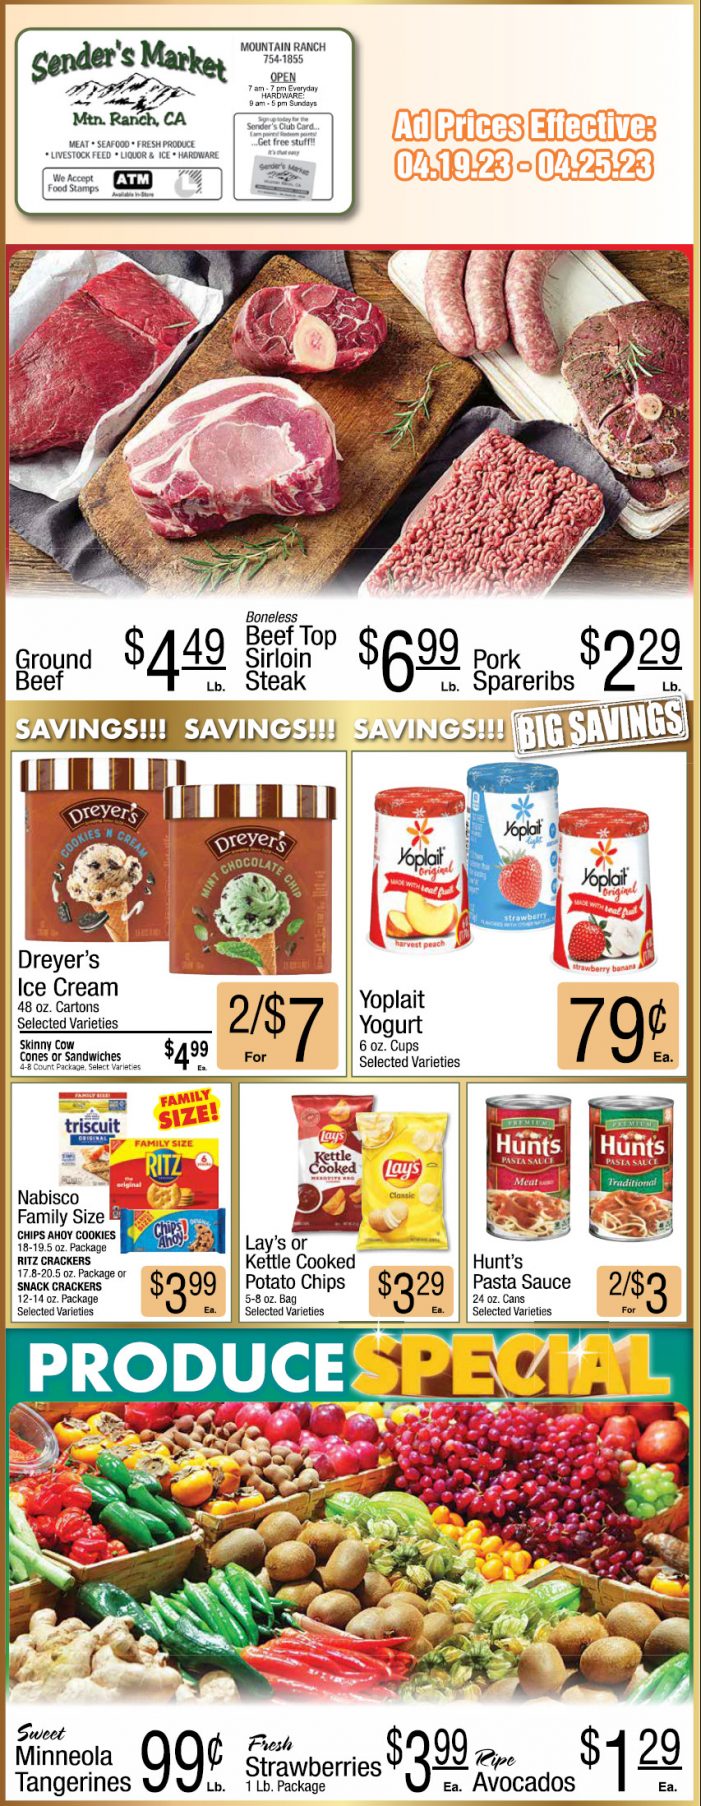 Sender’s Market Weekly Ad & Grocery Specials April 19 – 25!  Shop Local & Save!!